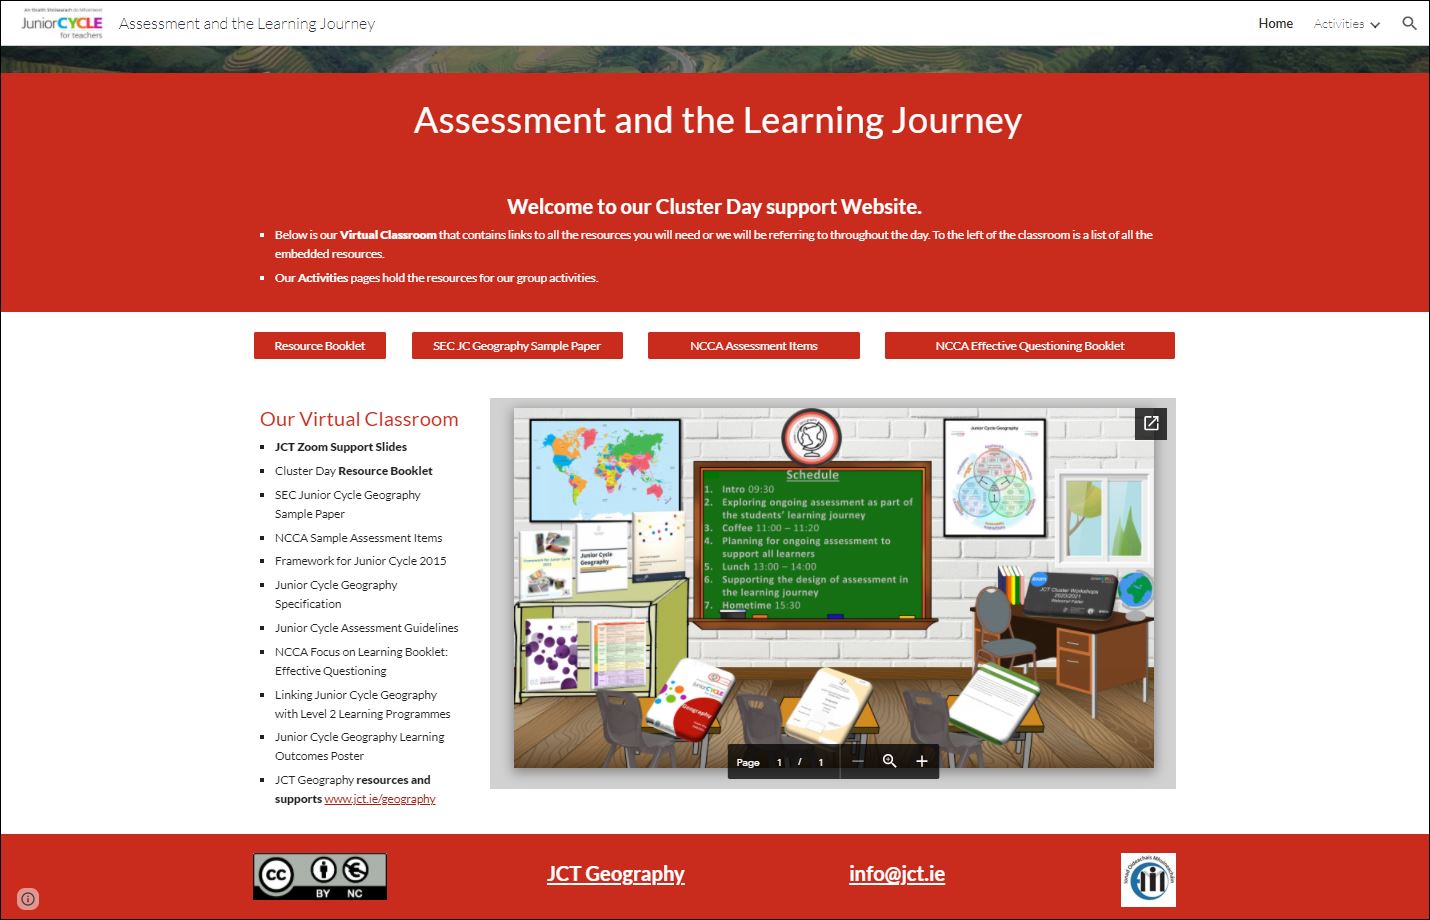 Assessment and the Learning Journey Website